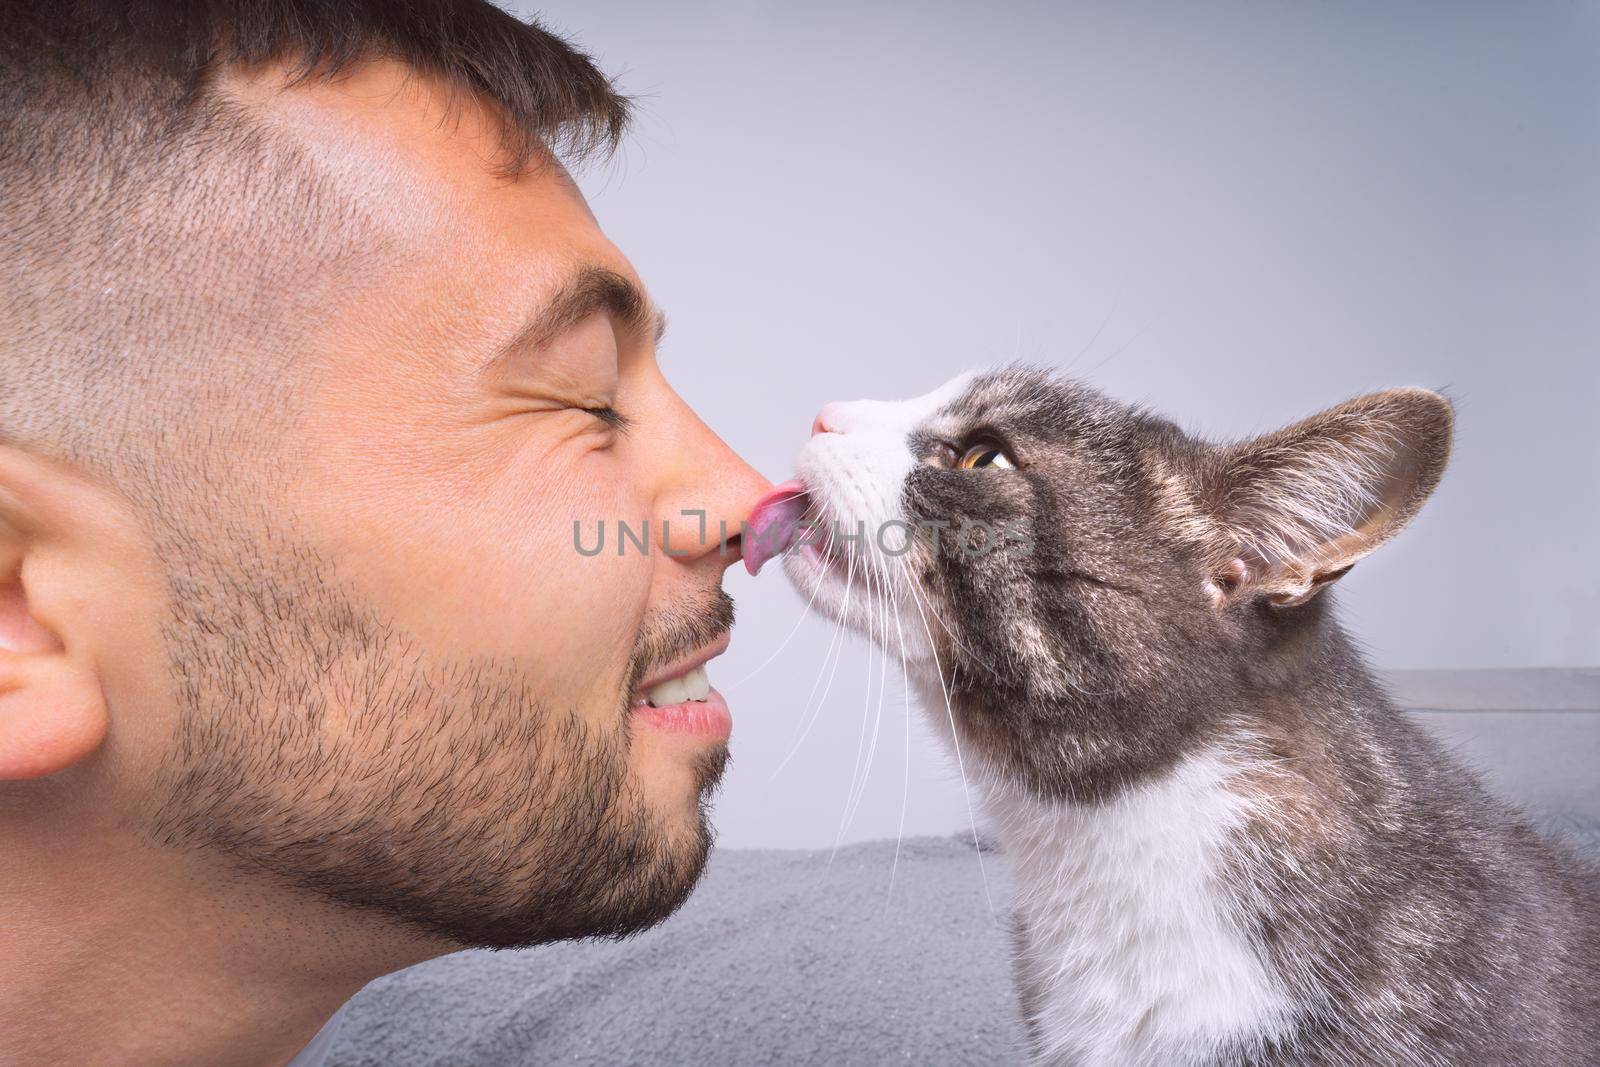 Cute cat licking or kissing owner's nose. Pets and humans friendship, love and trust concept by DariaKulkova